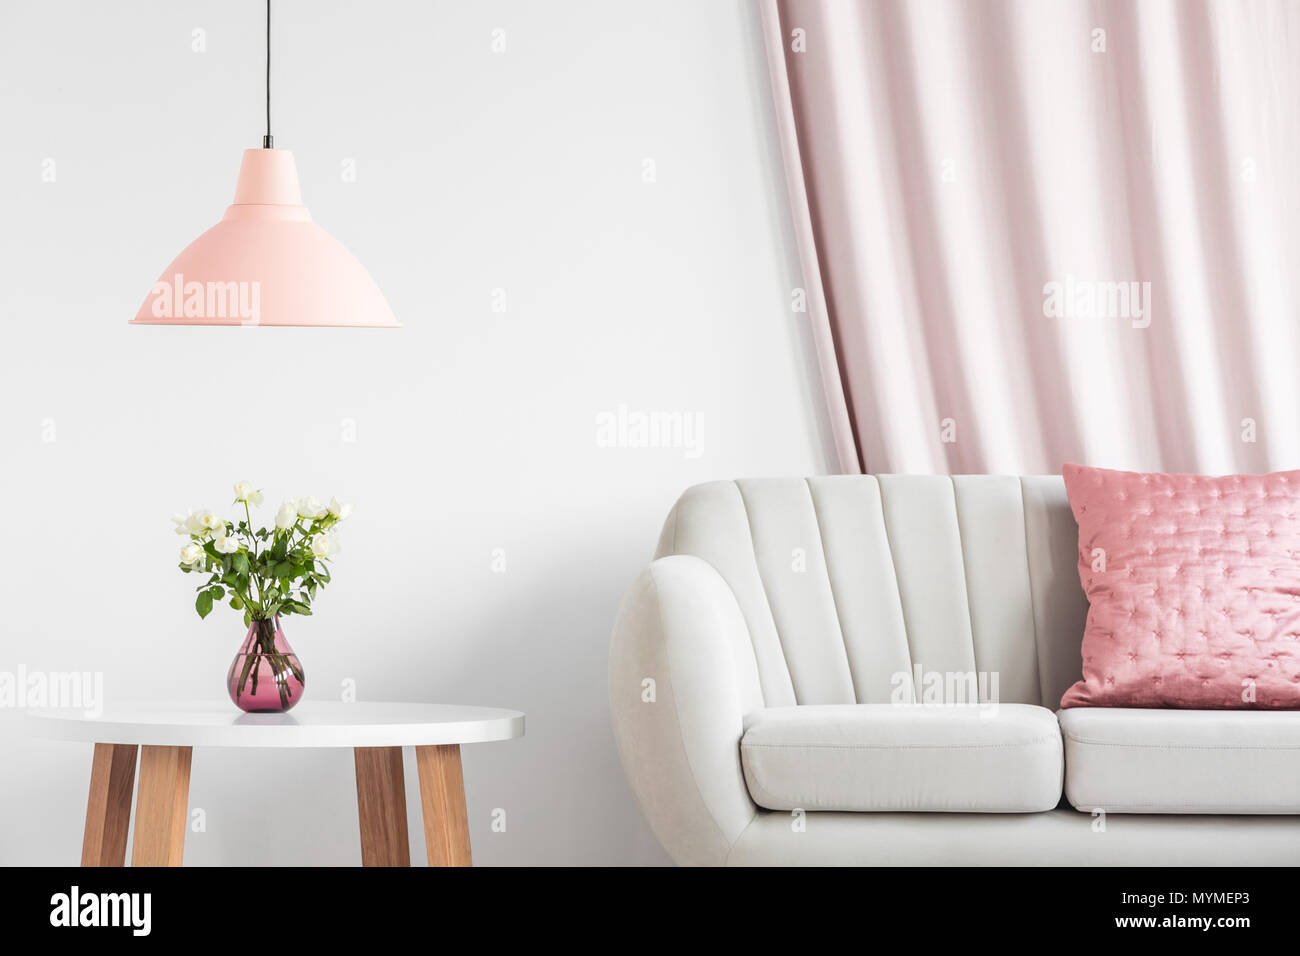 Peach lamp above wooden table with white roses in pink vase next to a sofa in living room interior Stock Photo